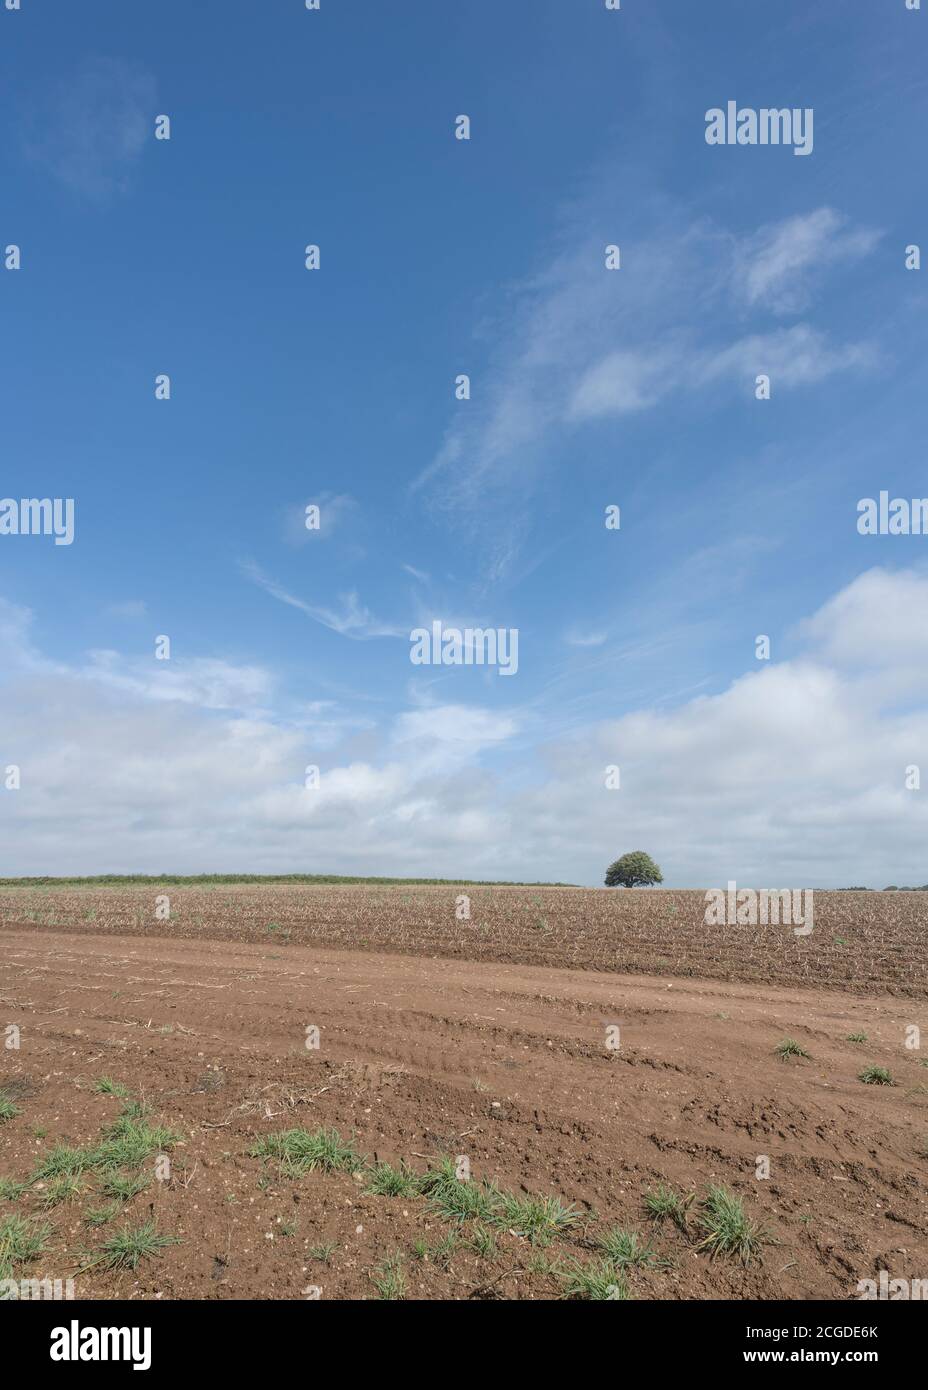 Field of potato stalk stubble after harvesting. For UK agriculture and farming, summer blue skies, every cloud has a silver lining, cloud computing. Stock Photo